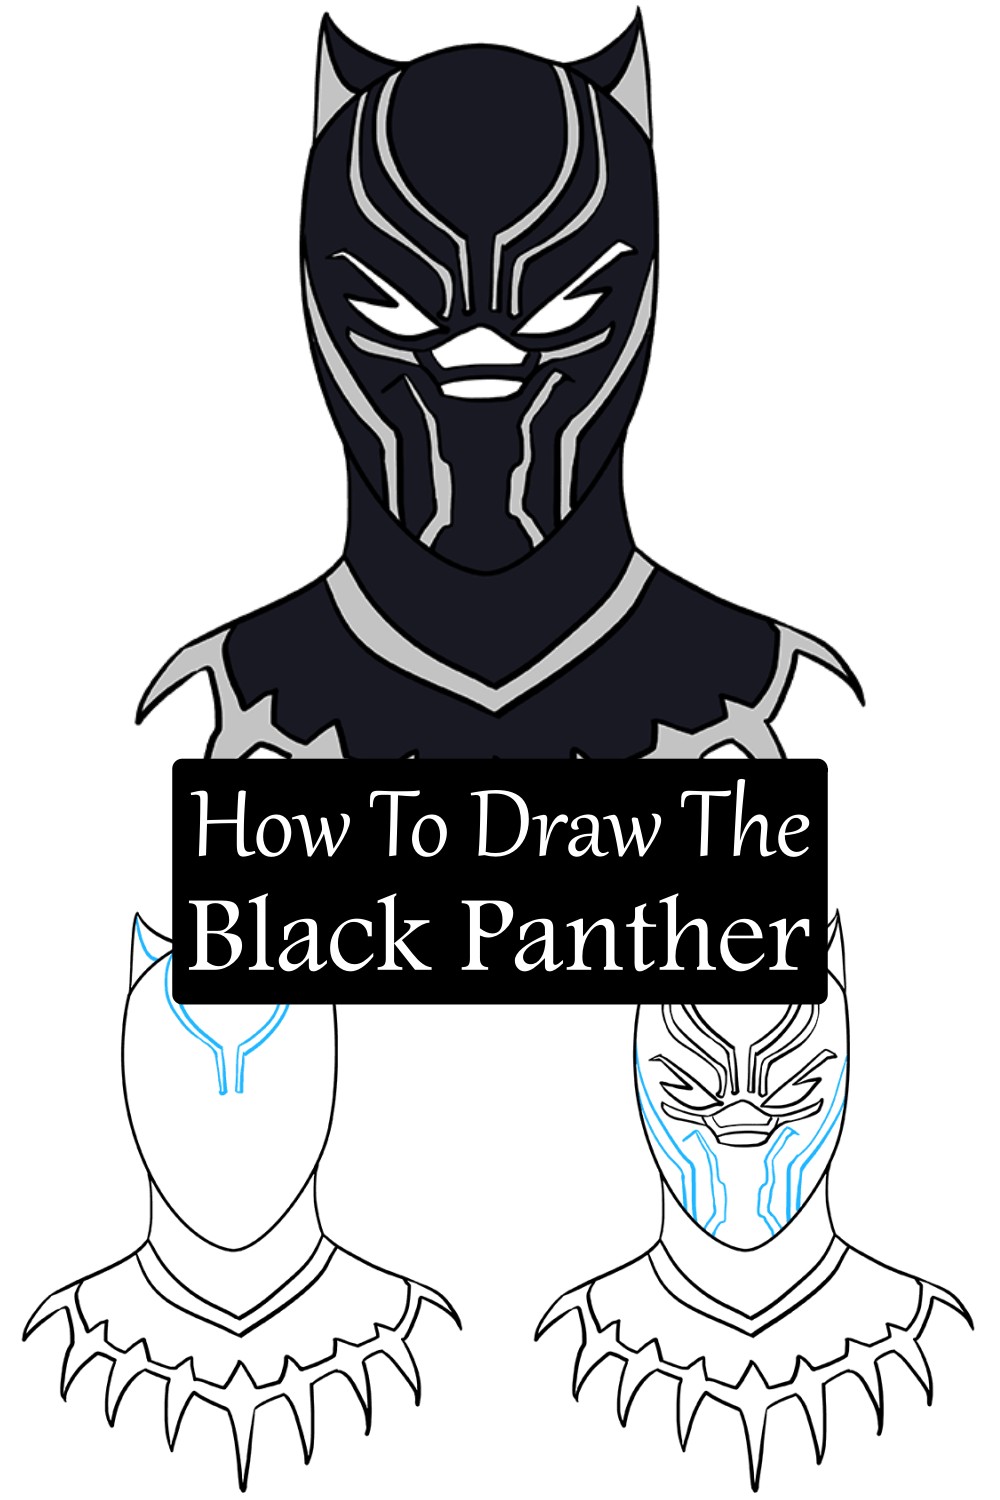 How To Draw The Black Panther